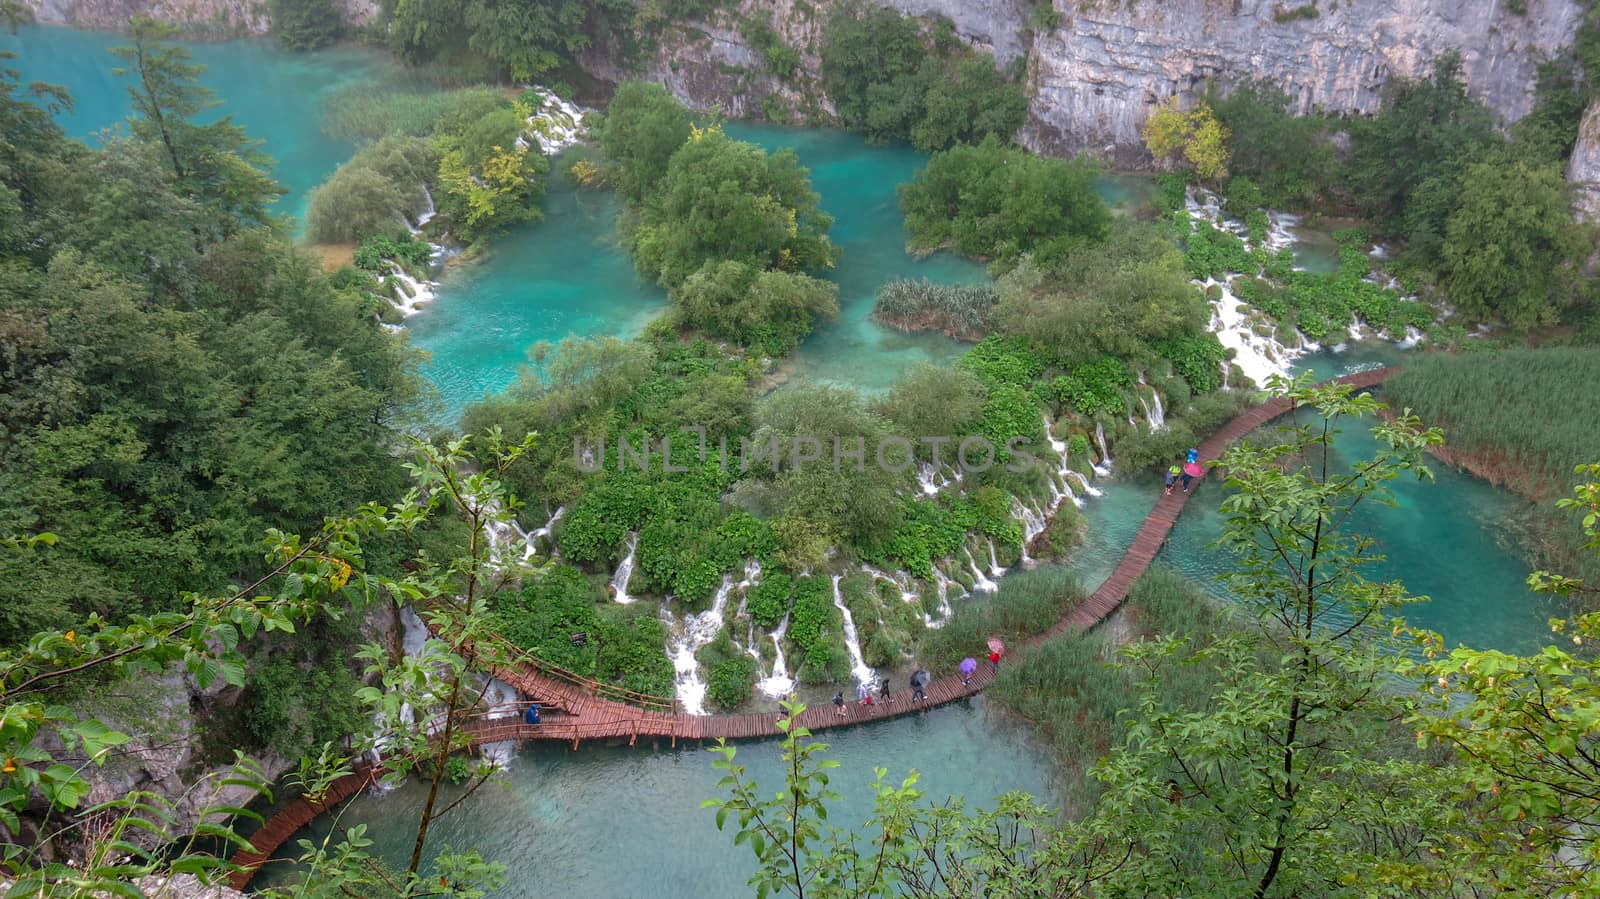 Tourists on the wooden park pathways enjoying the view of emerald lakes, cascades and crystal clear water, Plitvice Lakes National Park, Croatia by Sanatana2008